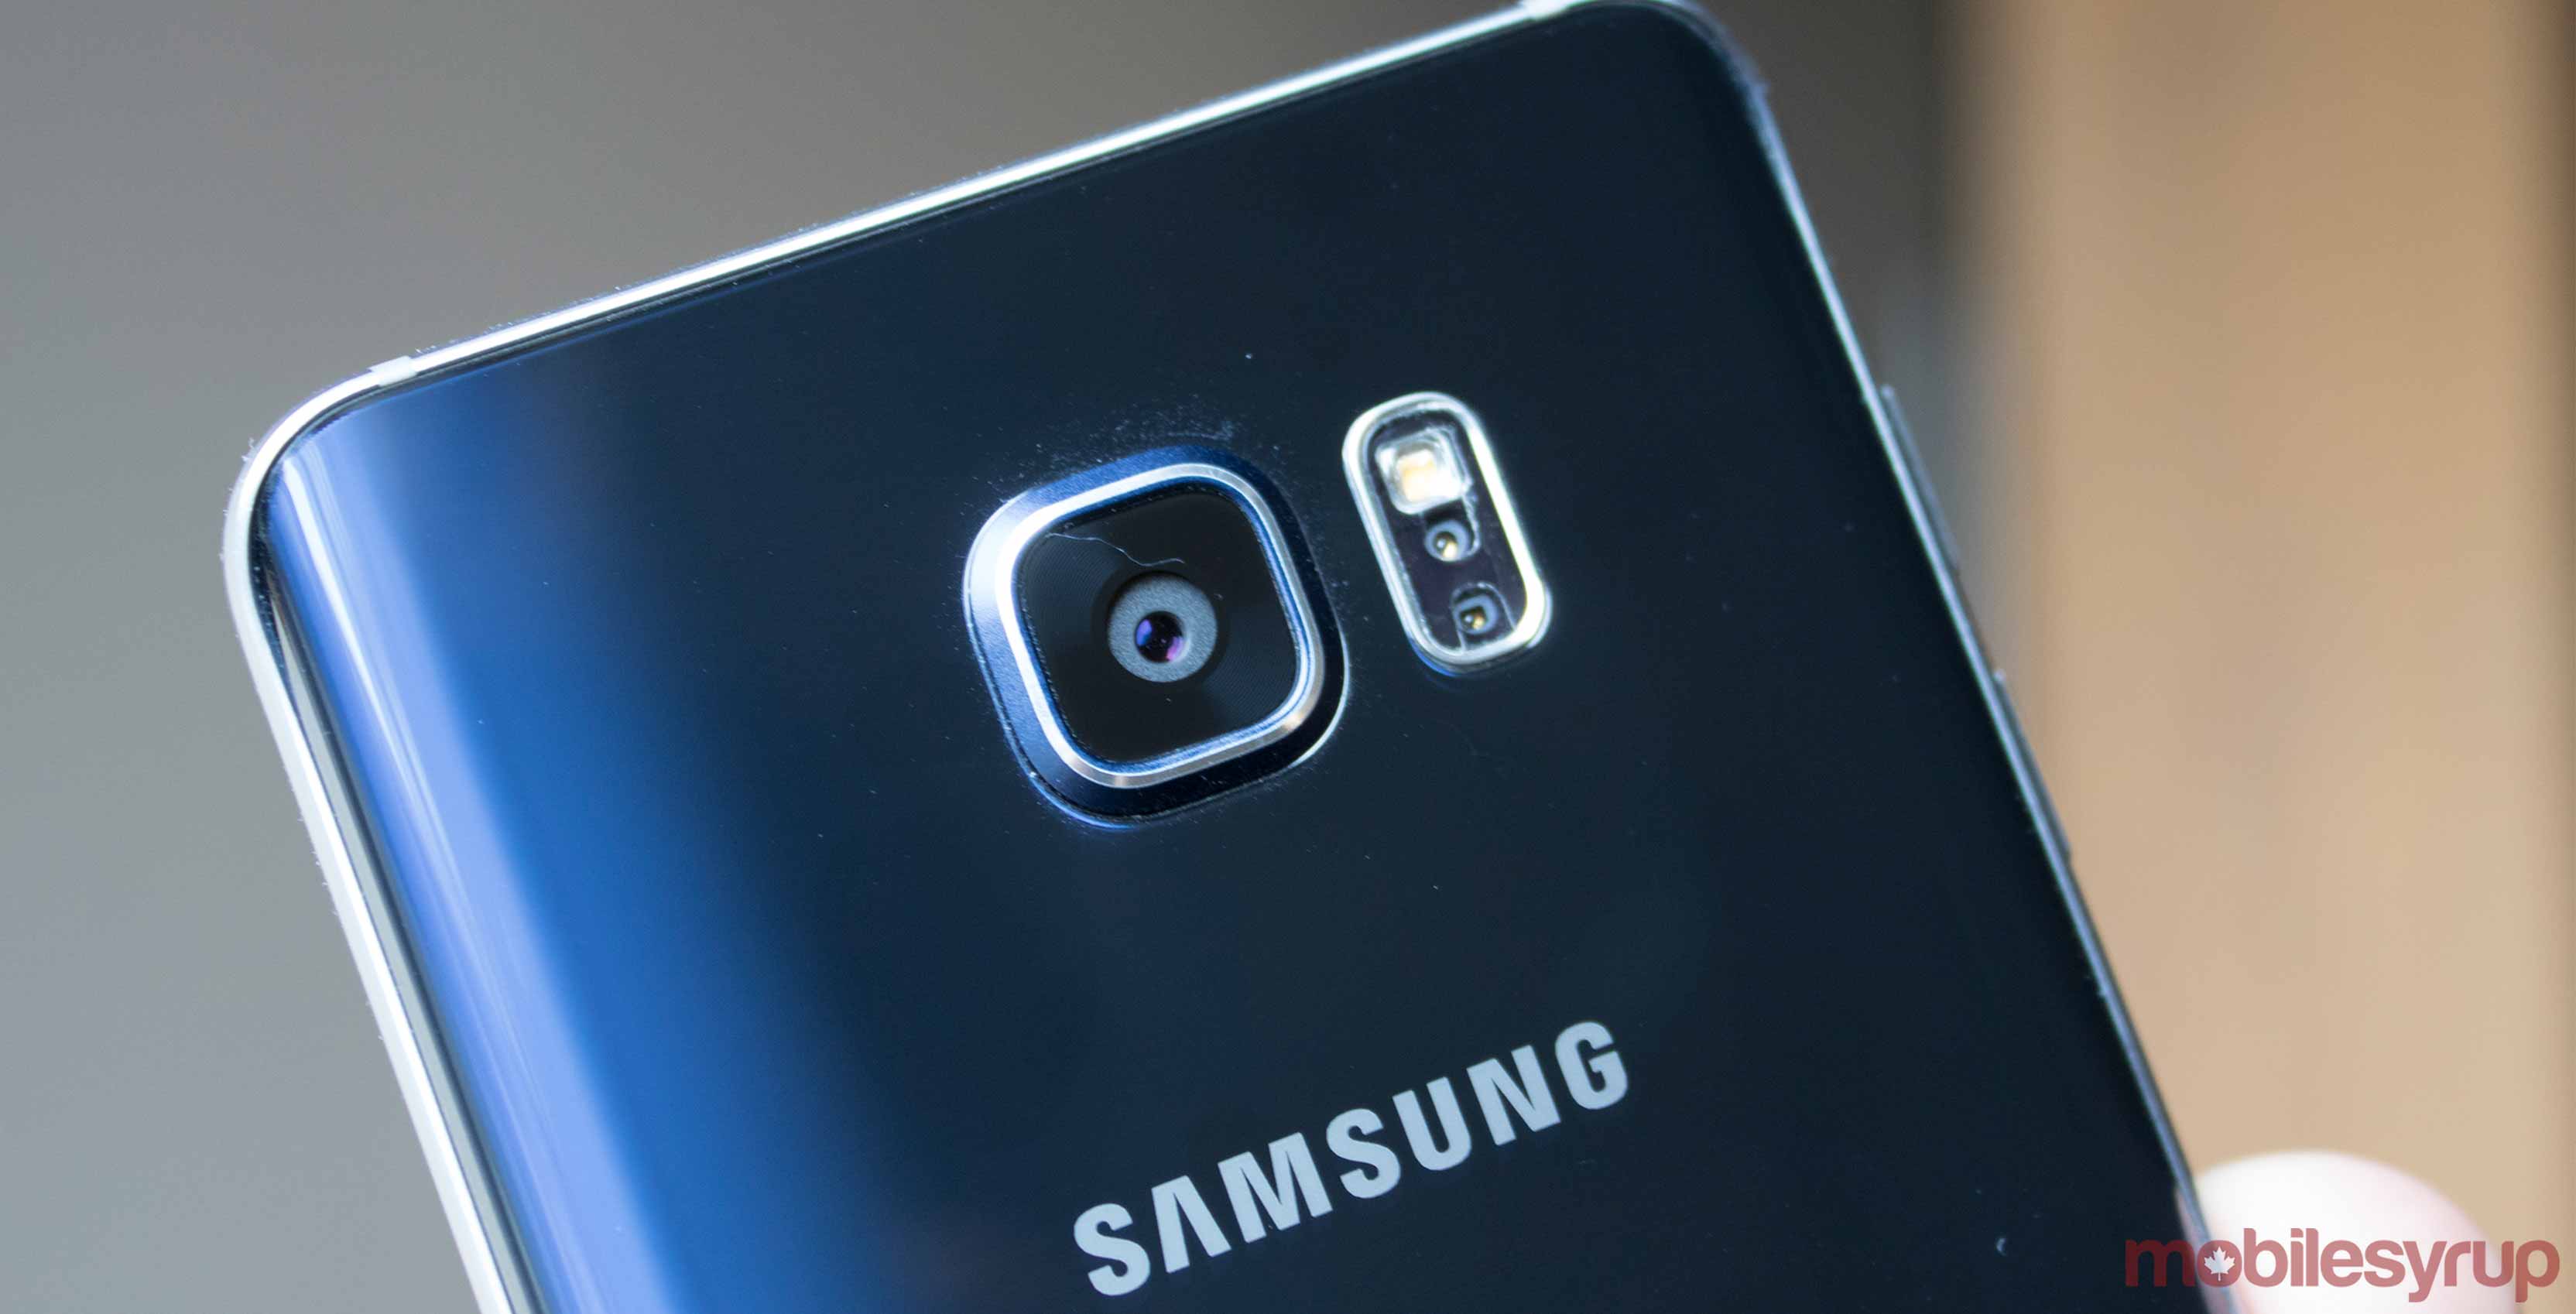 Samsung S7 will not look like the Galaxy S8